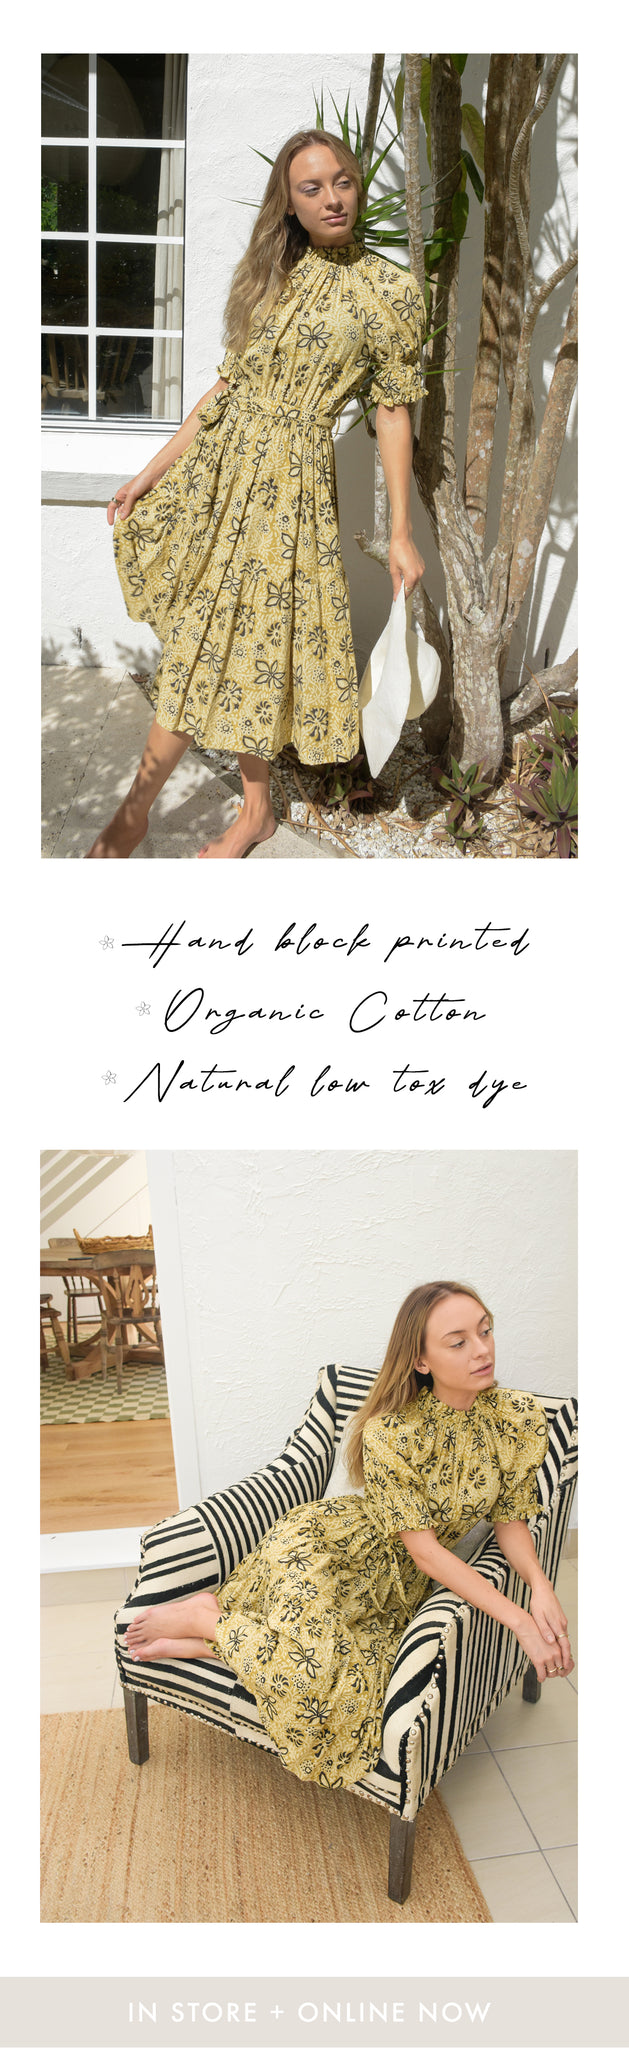 Hand block printed, organic cotton dresses, natural low tox dye, non toxic, womenswear, sustainable fashion, ethical production 